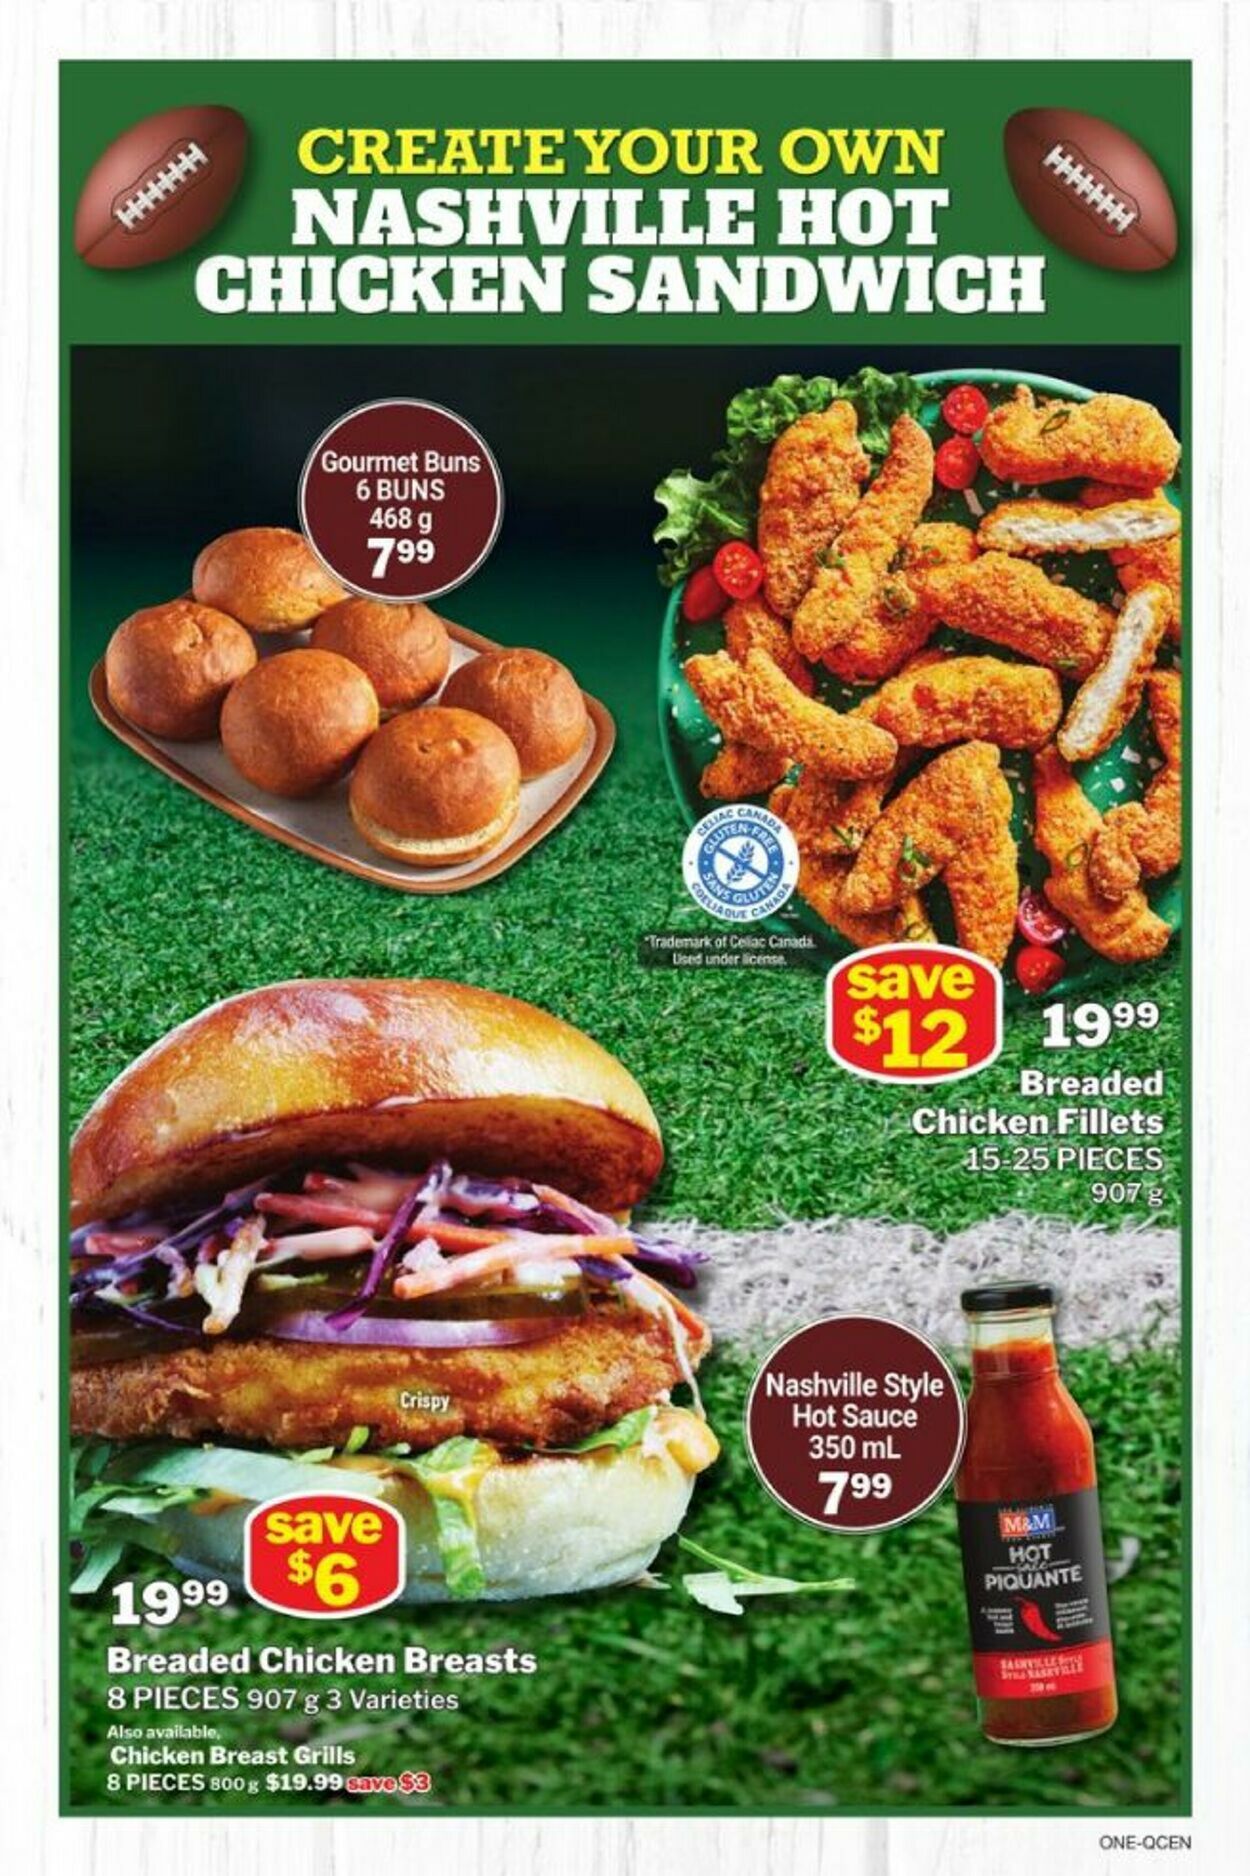 M&M Food Market Flyer from 02/01/2024